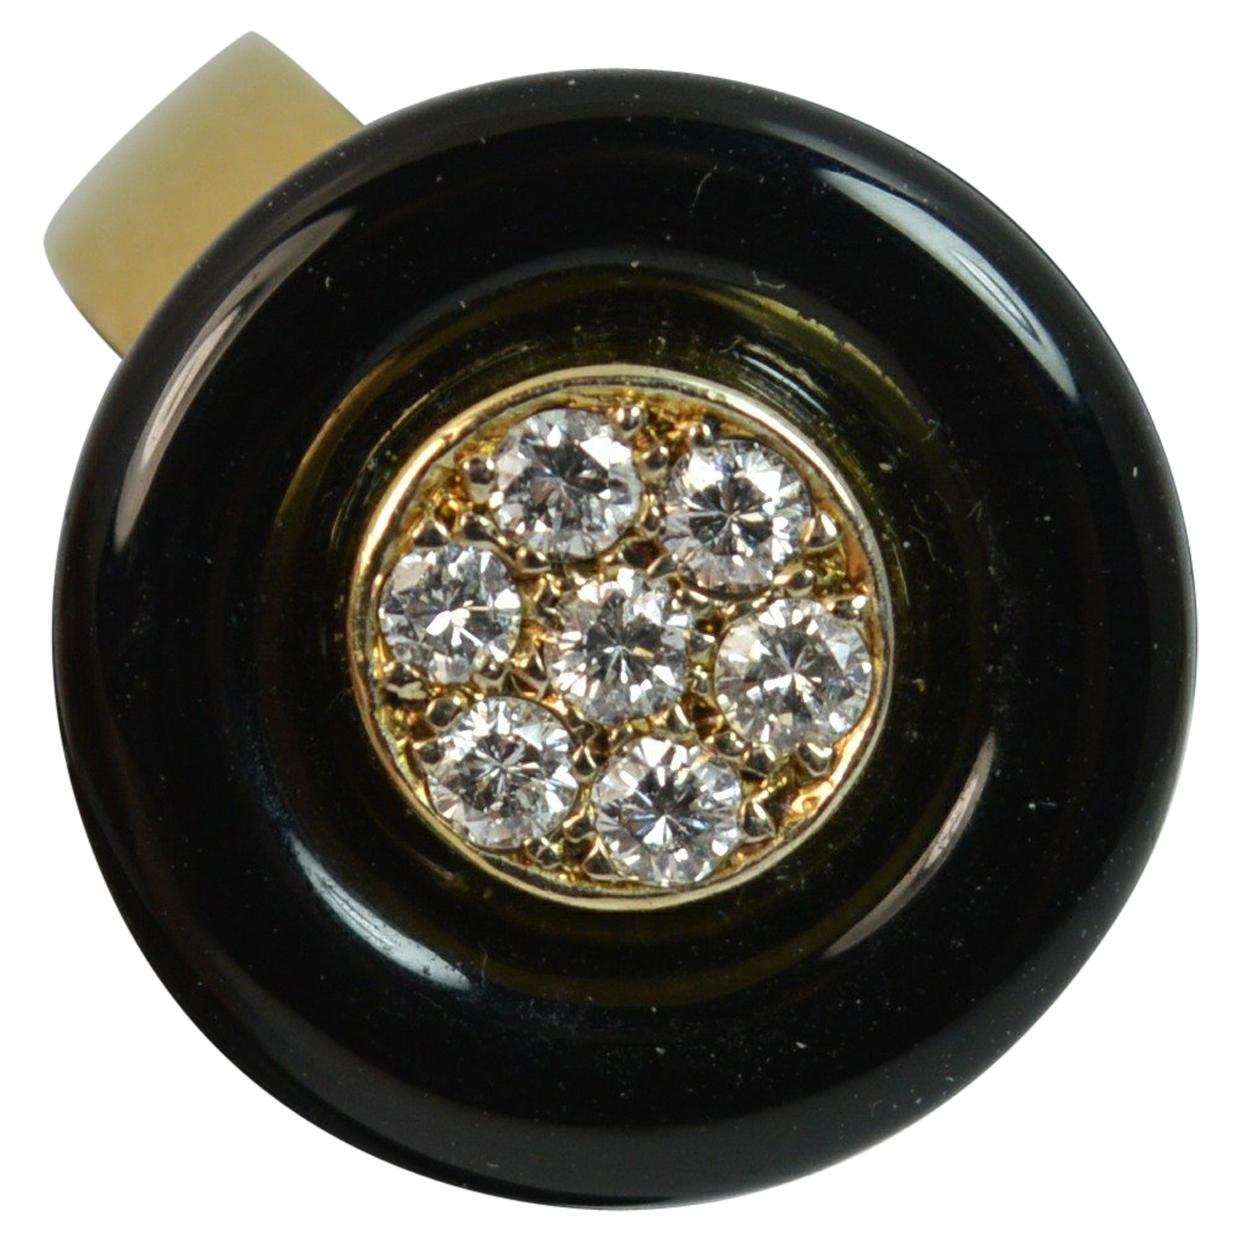 French 18 Carat Gold Onyx and VS Diamond Halo Disc Ring